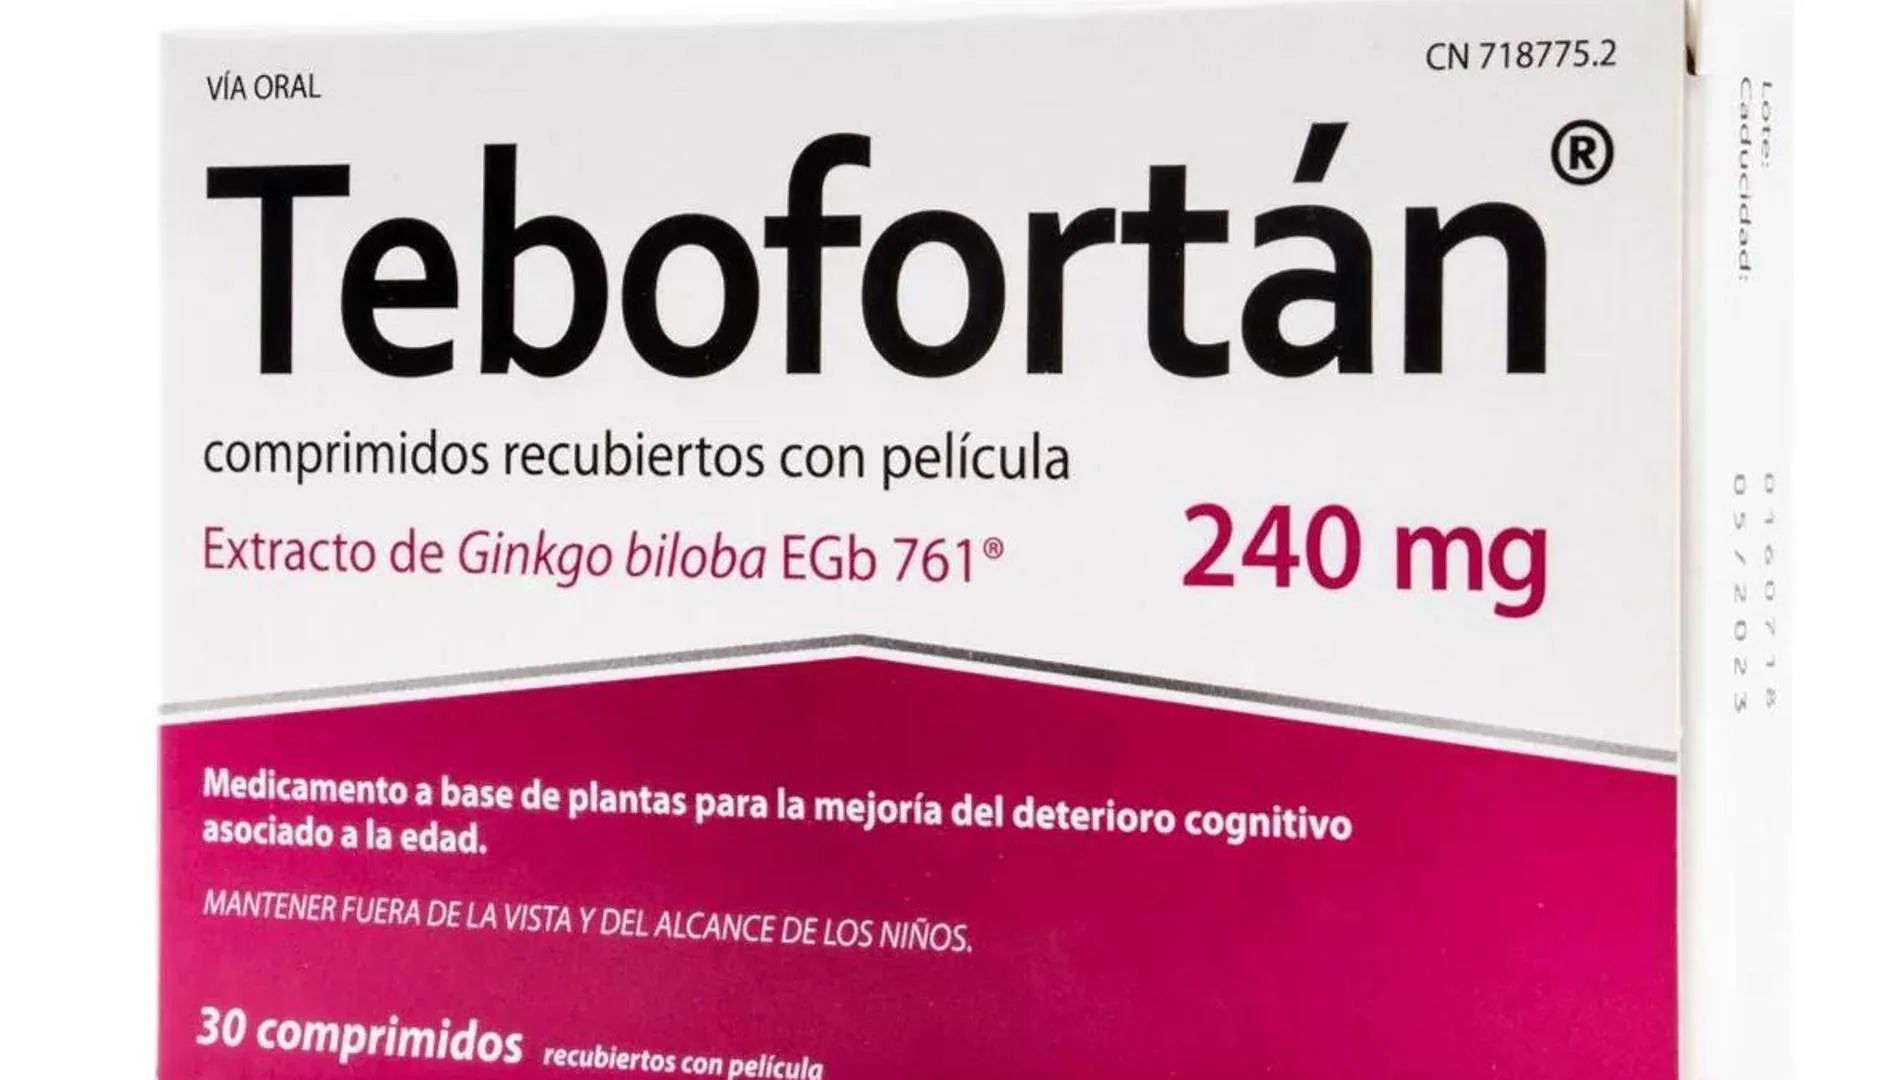 Researchers in Spain investigate whether a drug used to improve blood flow could help patients with early onset of dementia | Sur in English